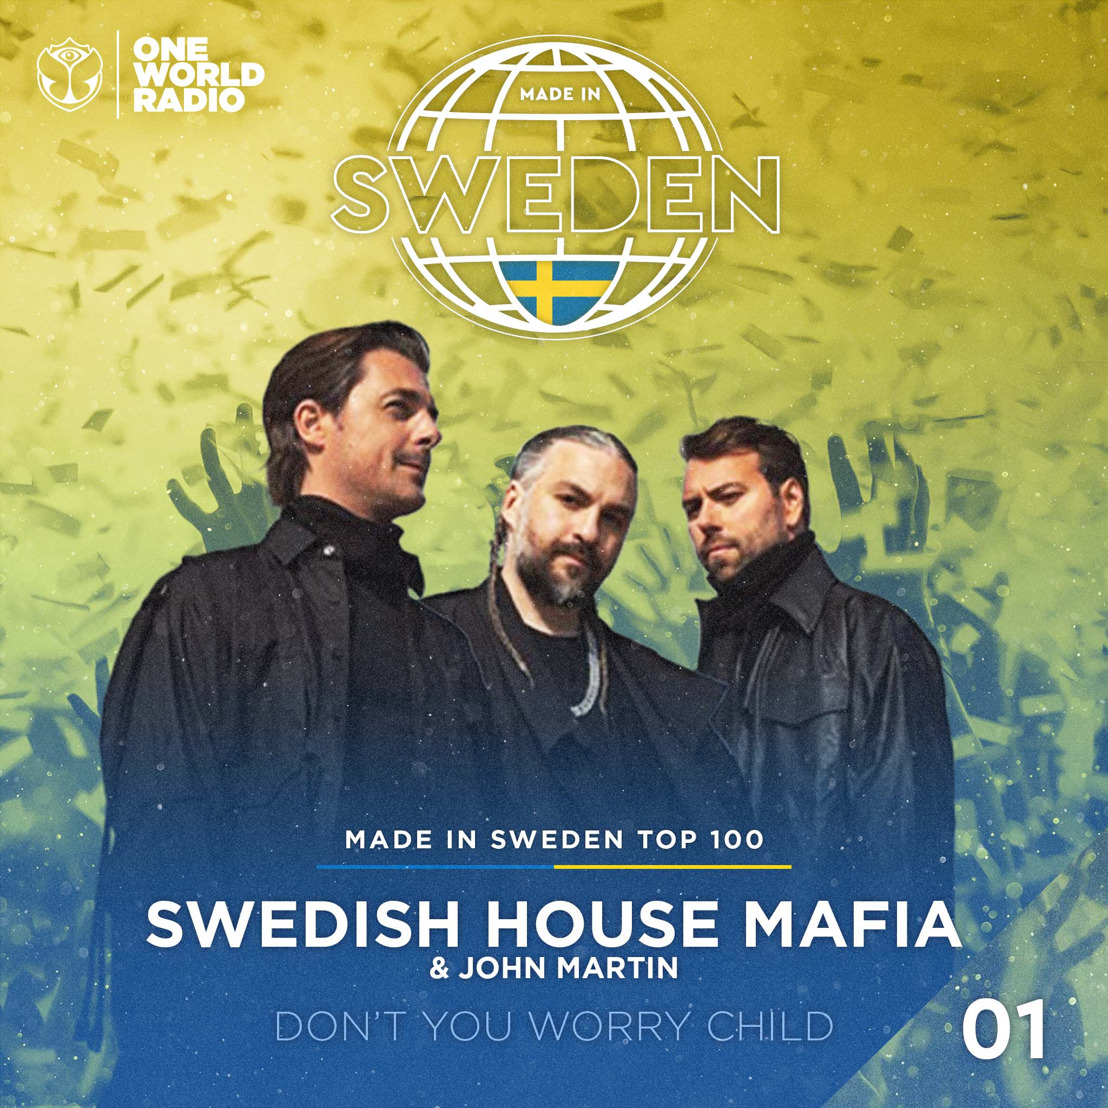 ‘Don’t You Worry Child’ by Swedish House Mafia becomes the number 1 in The Made in Sweden Top 100